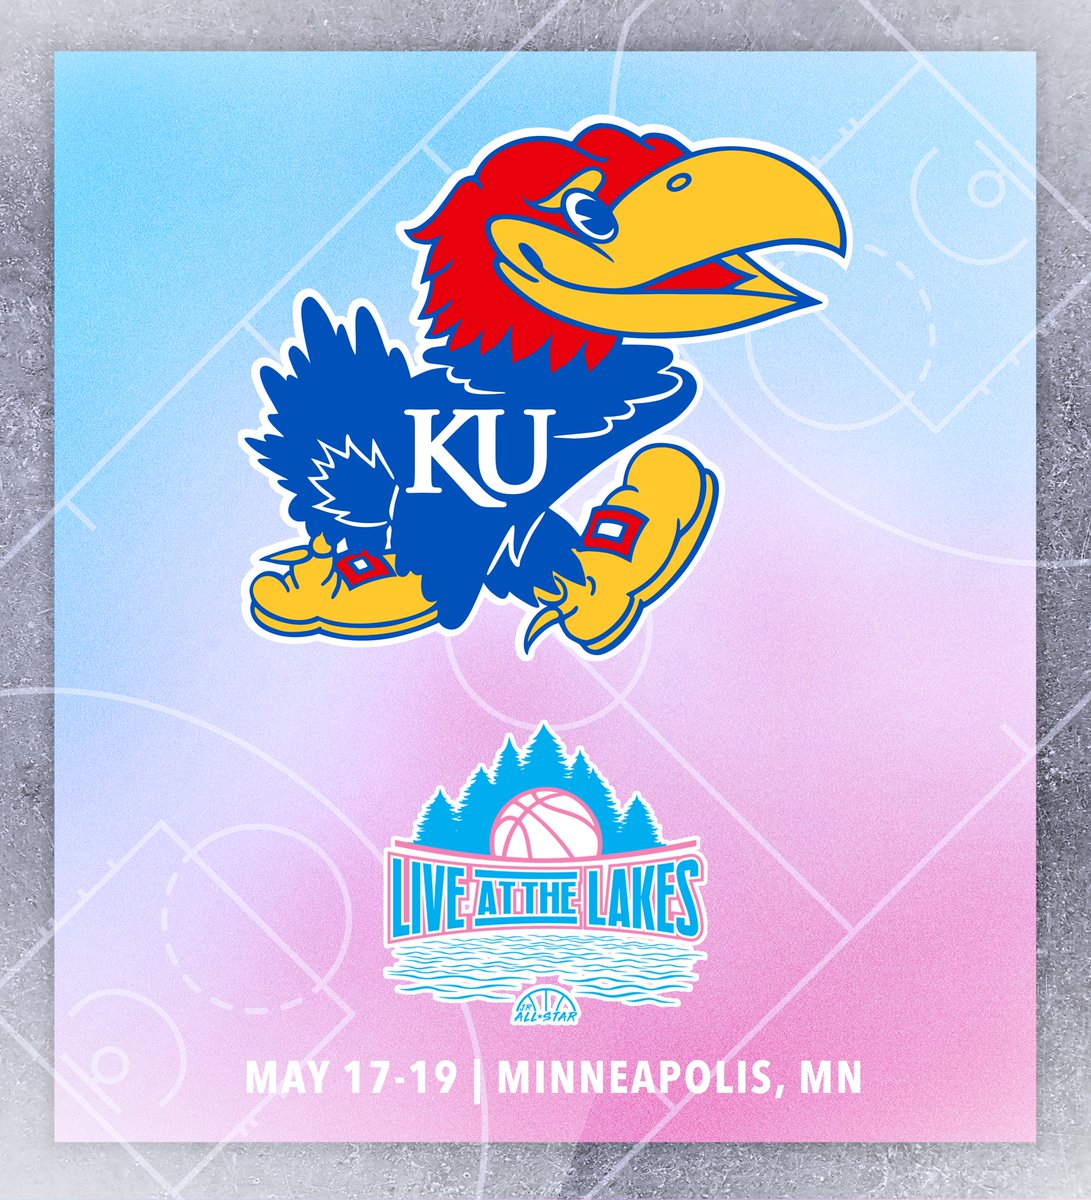 The University of Kansas (@KUWBball) is registered to attend 𝗟𝗜𝗩𝗘 𝗔𝗧 𝗧𝗛𝗘 𝗟𝗔𝗞𝗘𝗦! Join them in watching some of the nation’s best during the May Viewing Period.👇 jrallstar.com/exposure-event…